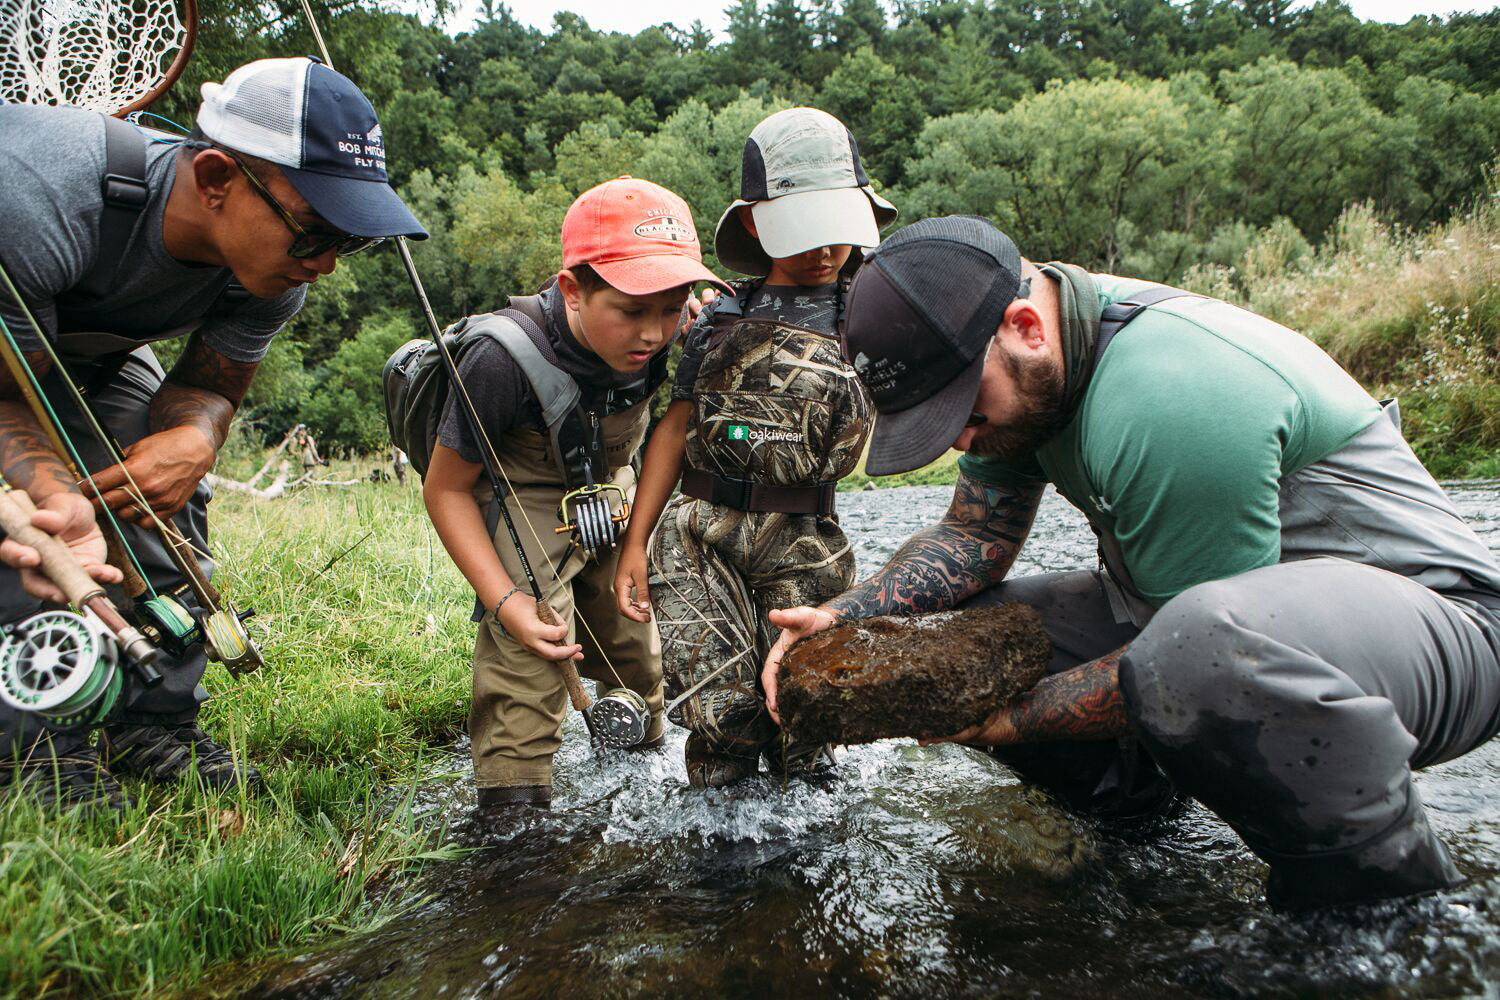 Beyond the Gear: 3 Important Things to Teach Your Kids On Their